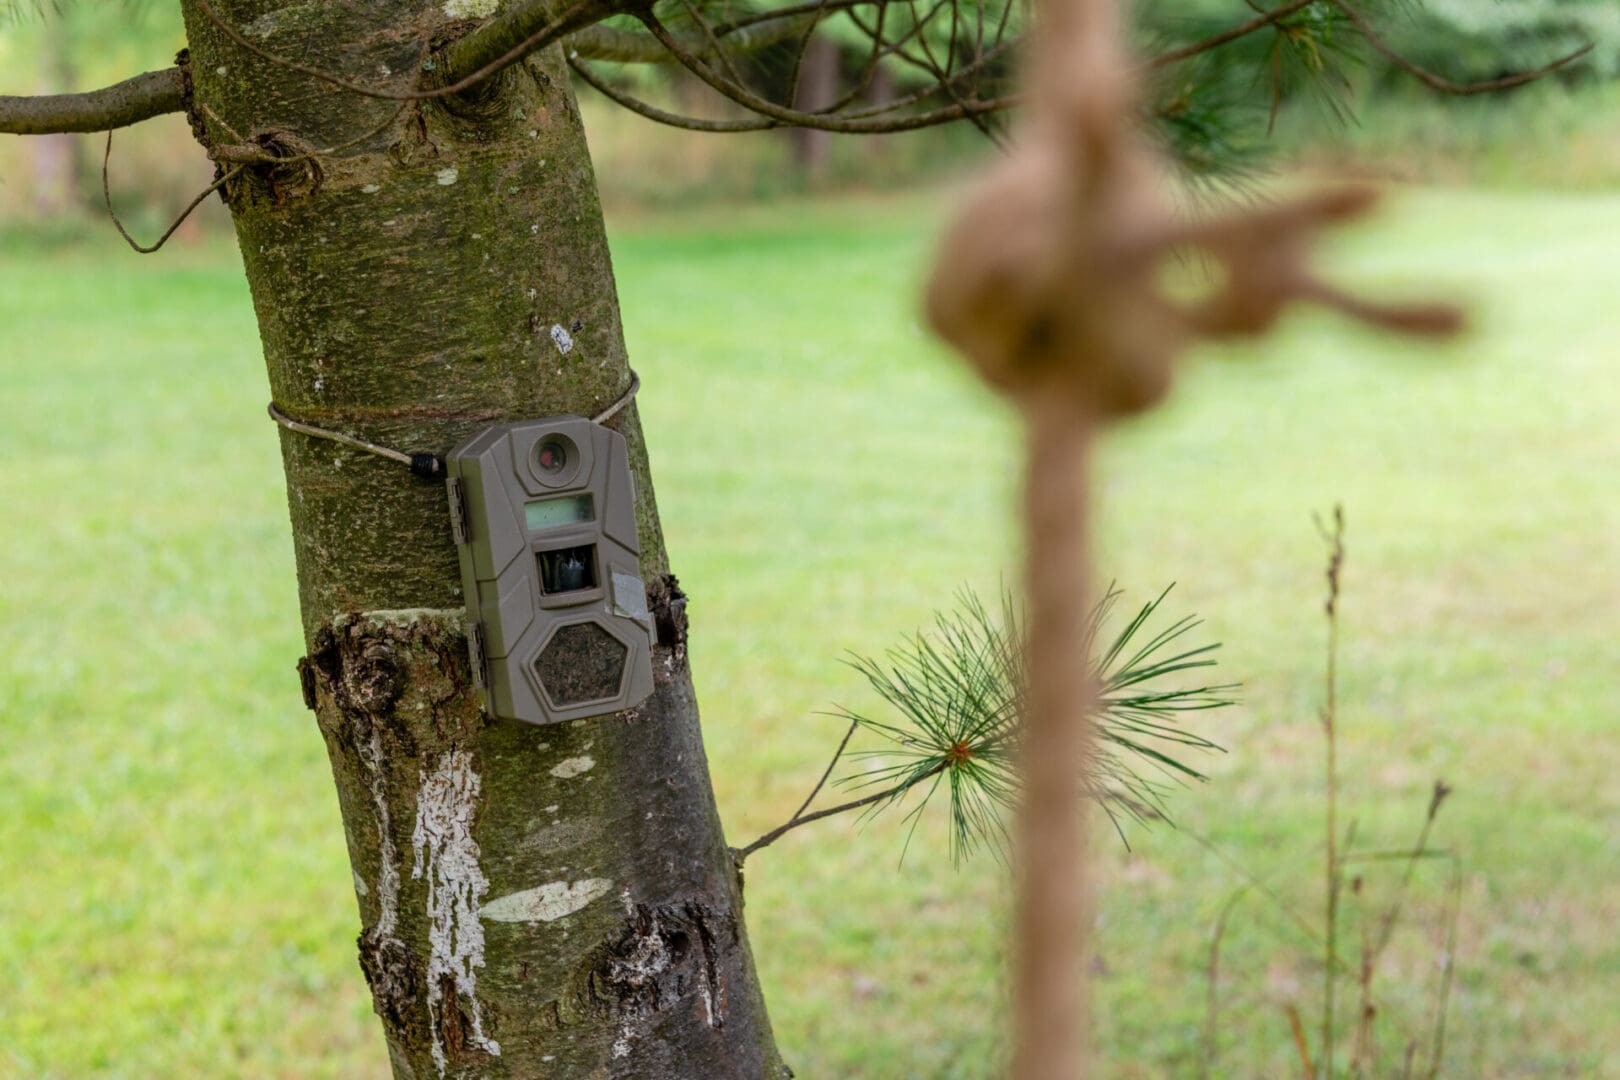 A camera attached to a tree in the woods.